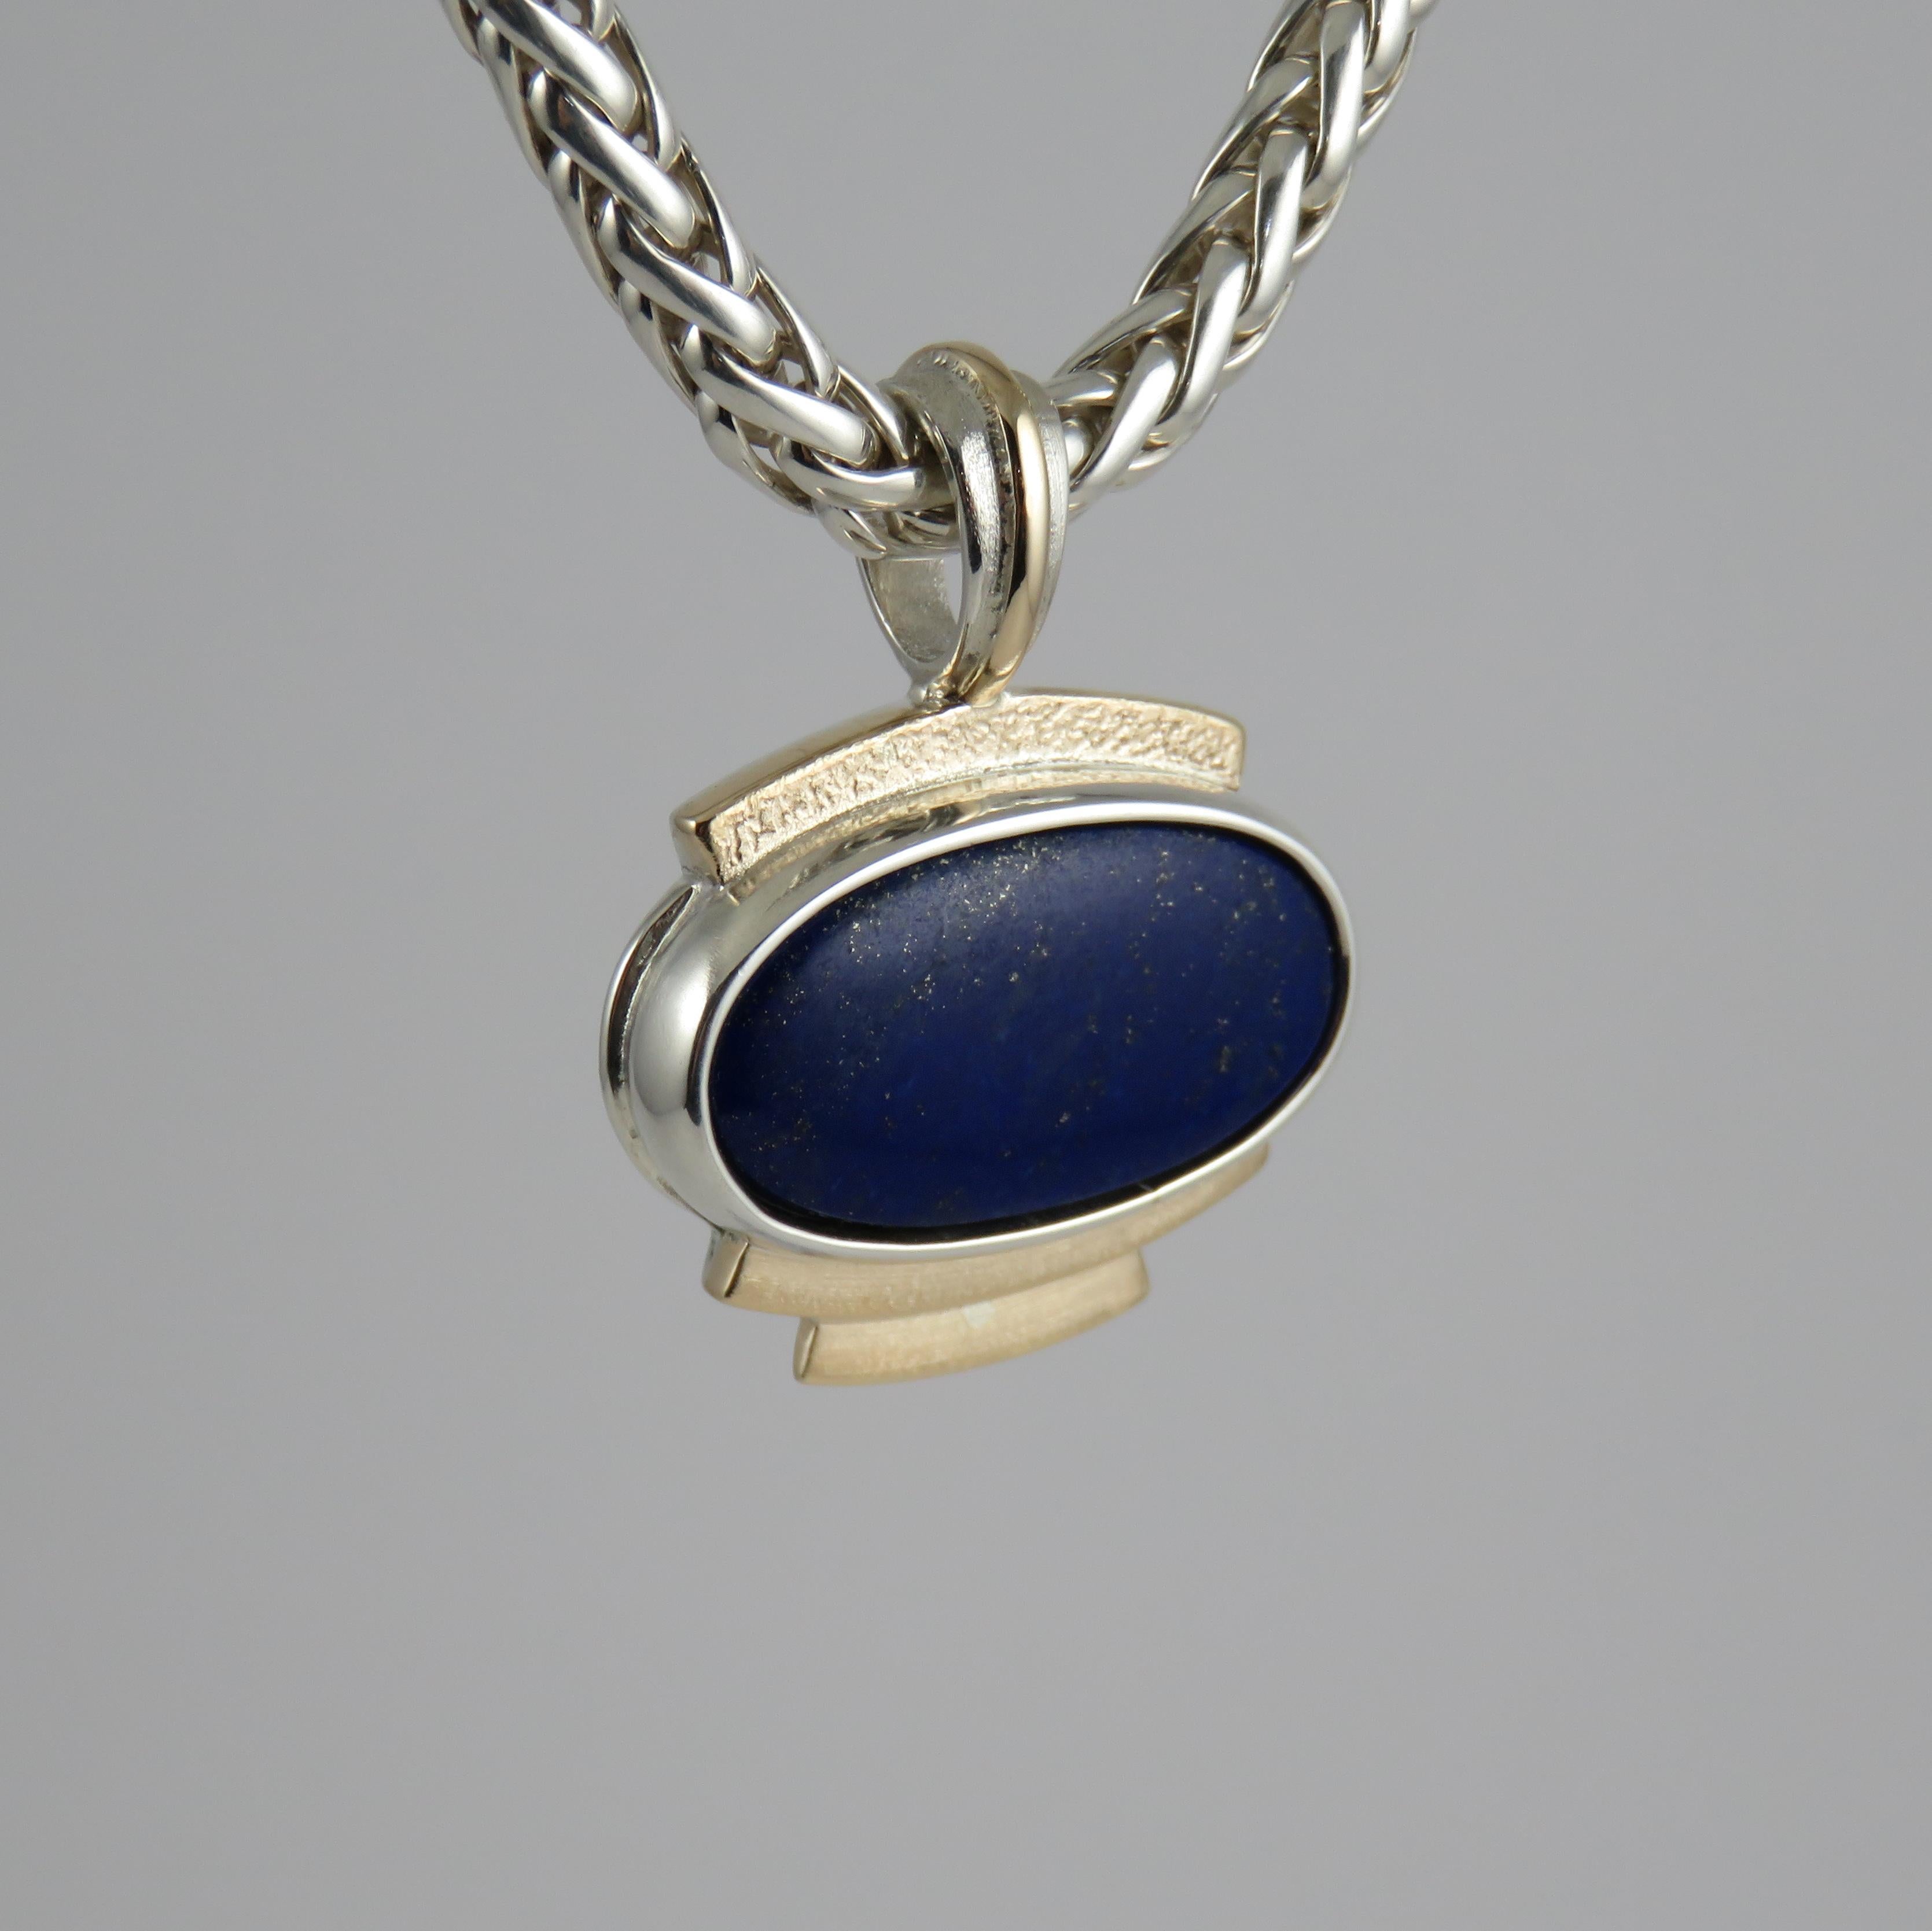 The lapis lazuli stone, totaling 29.46 carats takes center stage in this beautiful handmade pendant in a rub over cabochon setting, which is a classic and timeless style that allows the violet blue colored stone to shine with the pyrite and calcite